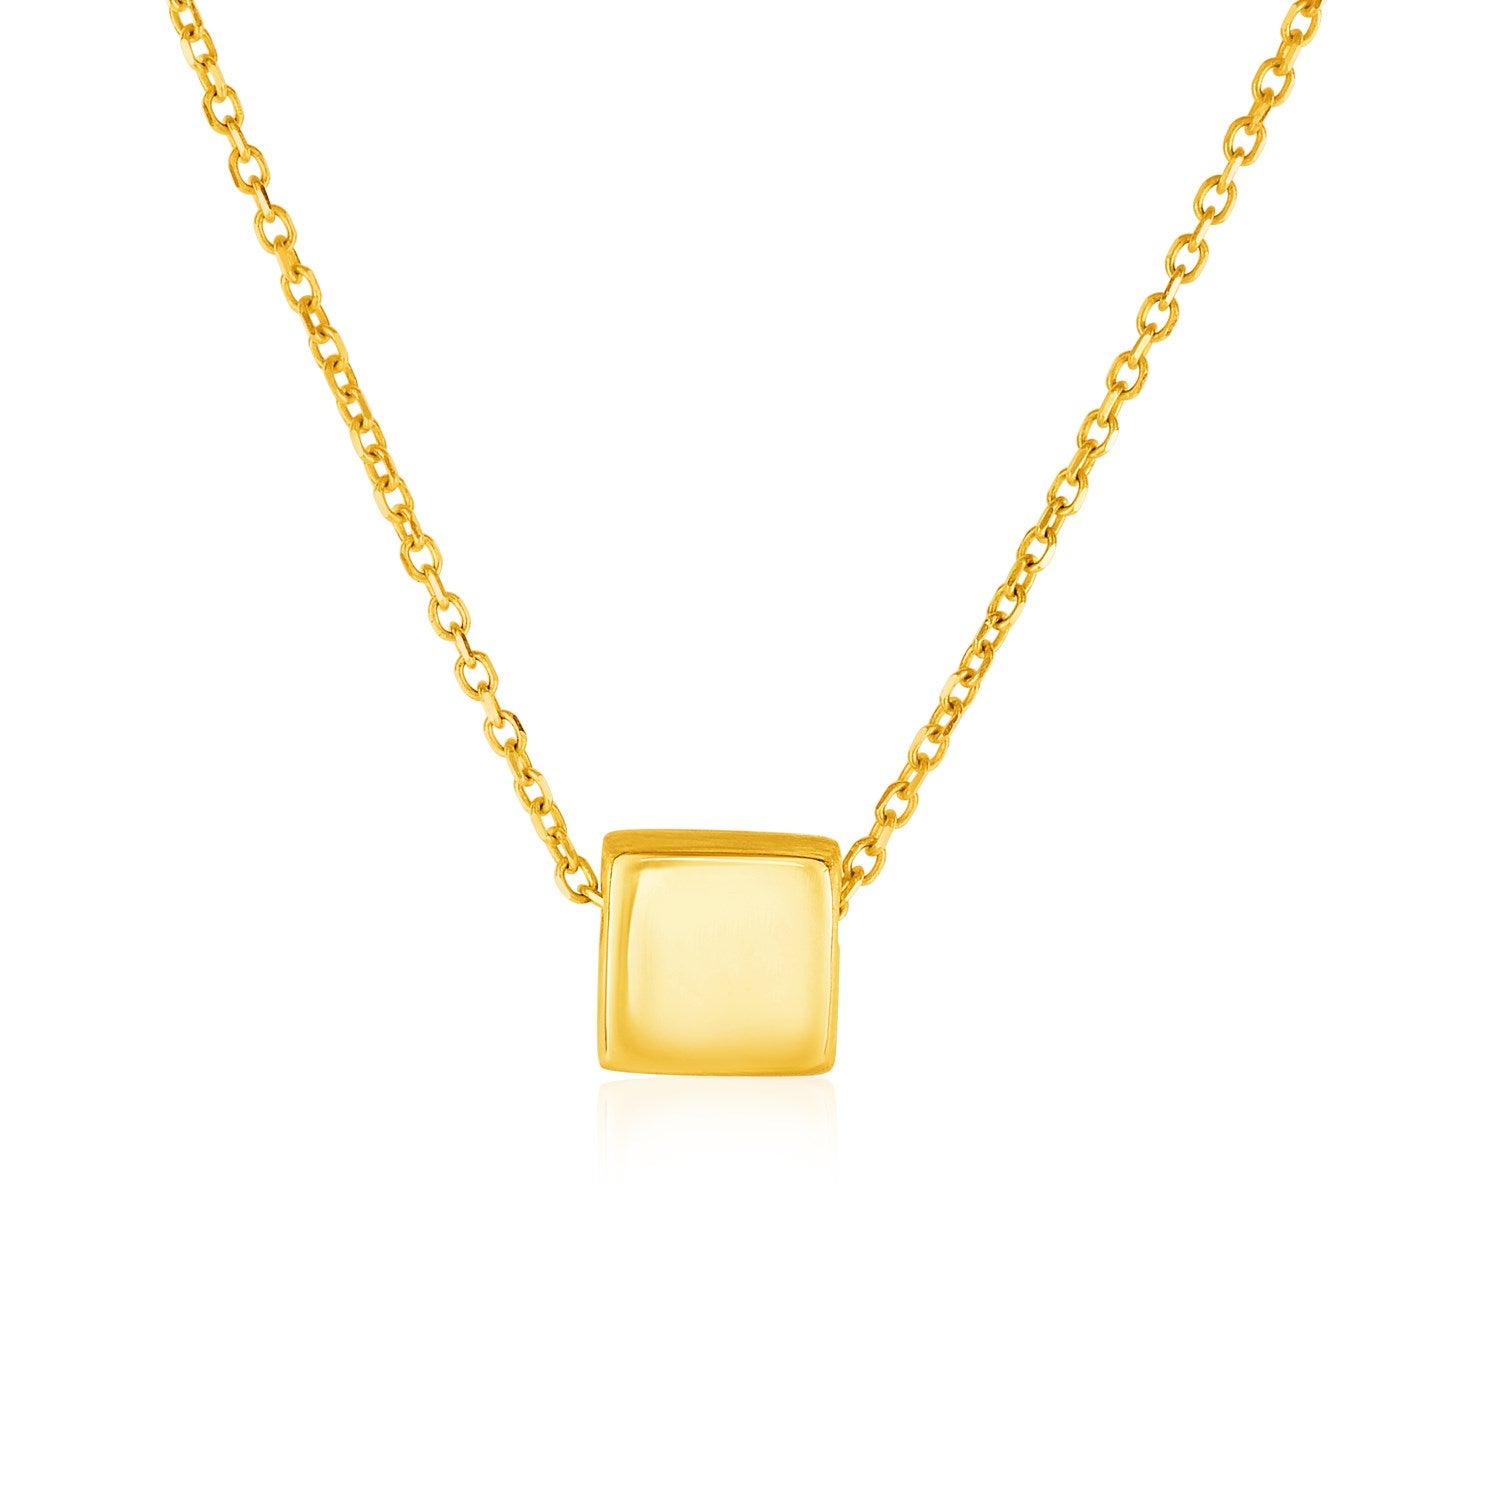 14K Yellow Gold With Shiny Square Pendant 60957-1